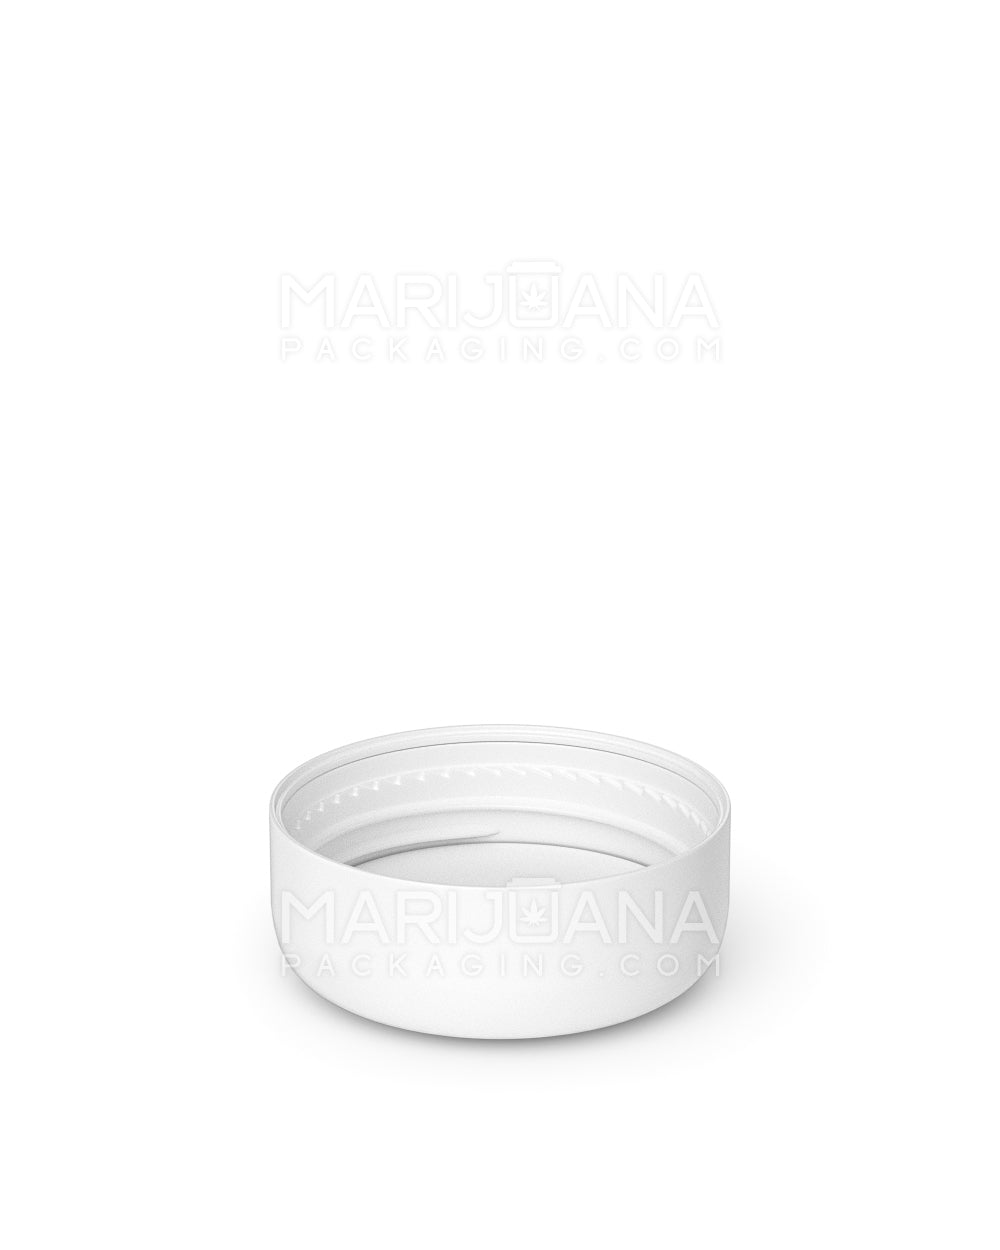 Child Resistant | Glossy White Glass Concentrate Containers w/ Cap | 32mm - 9mL - 320 Count